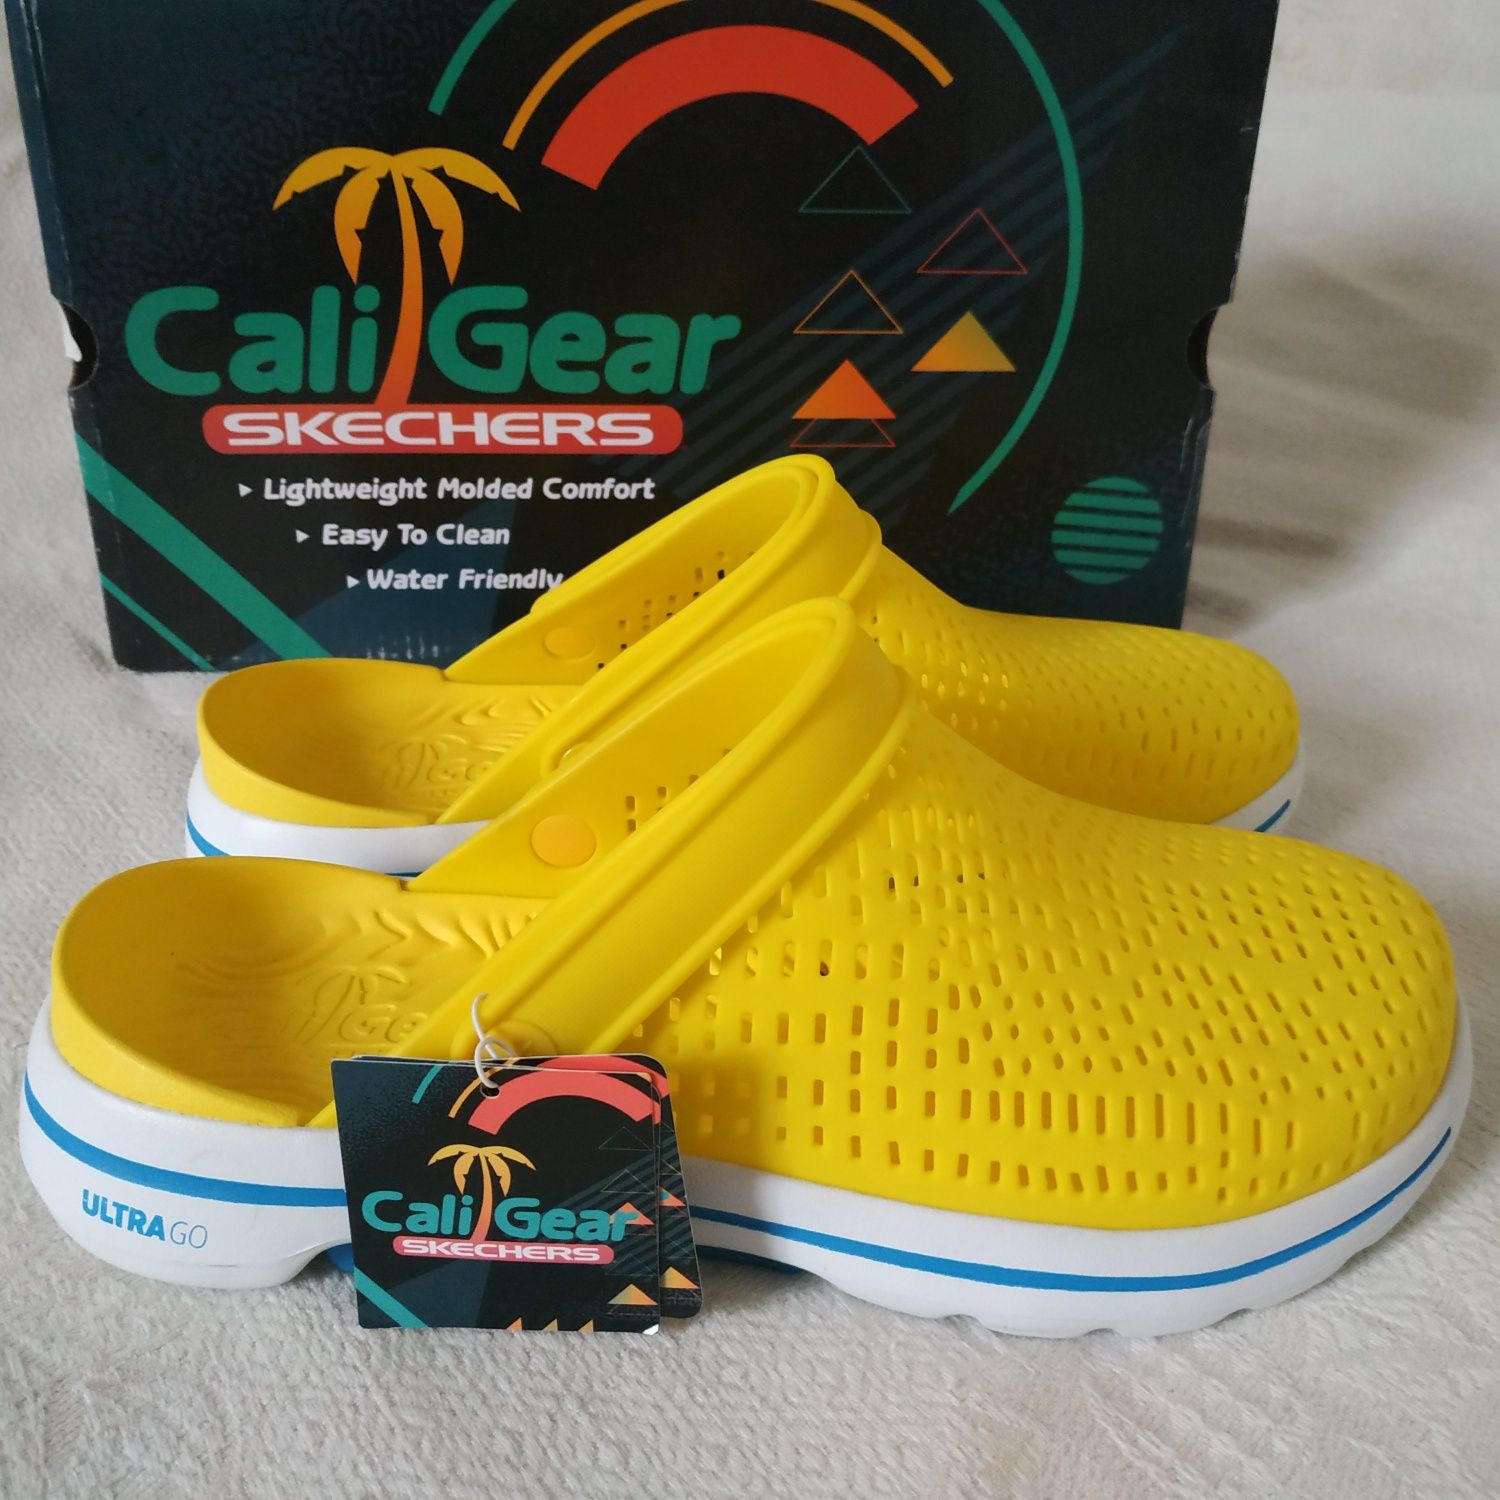 Skechers Cali Gear Ultra Go шлепанцы-сабо р.39 26см яркие стильные new